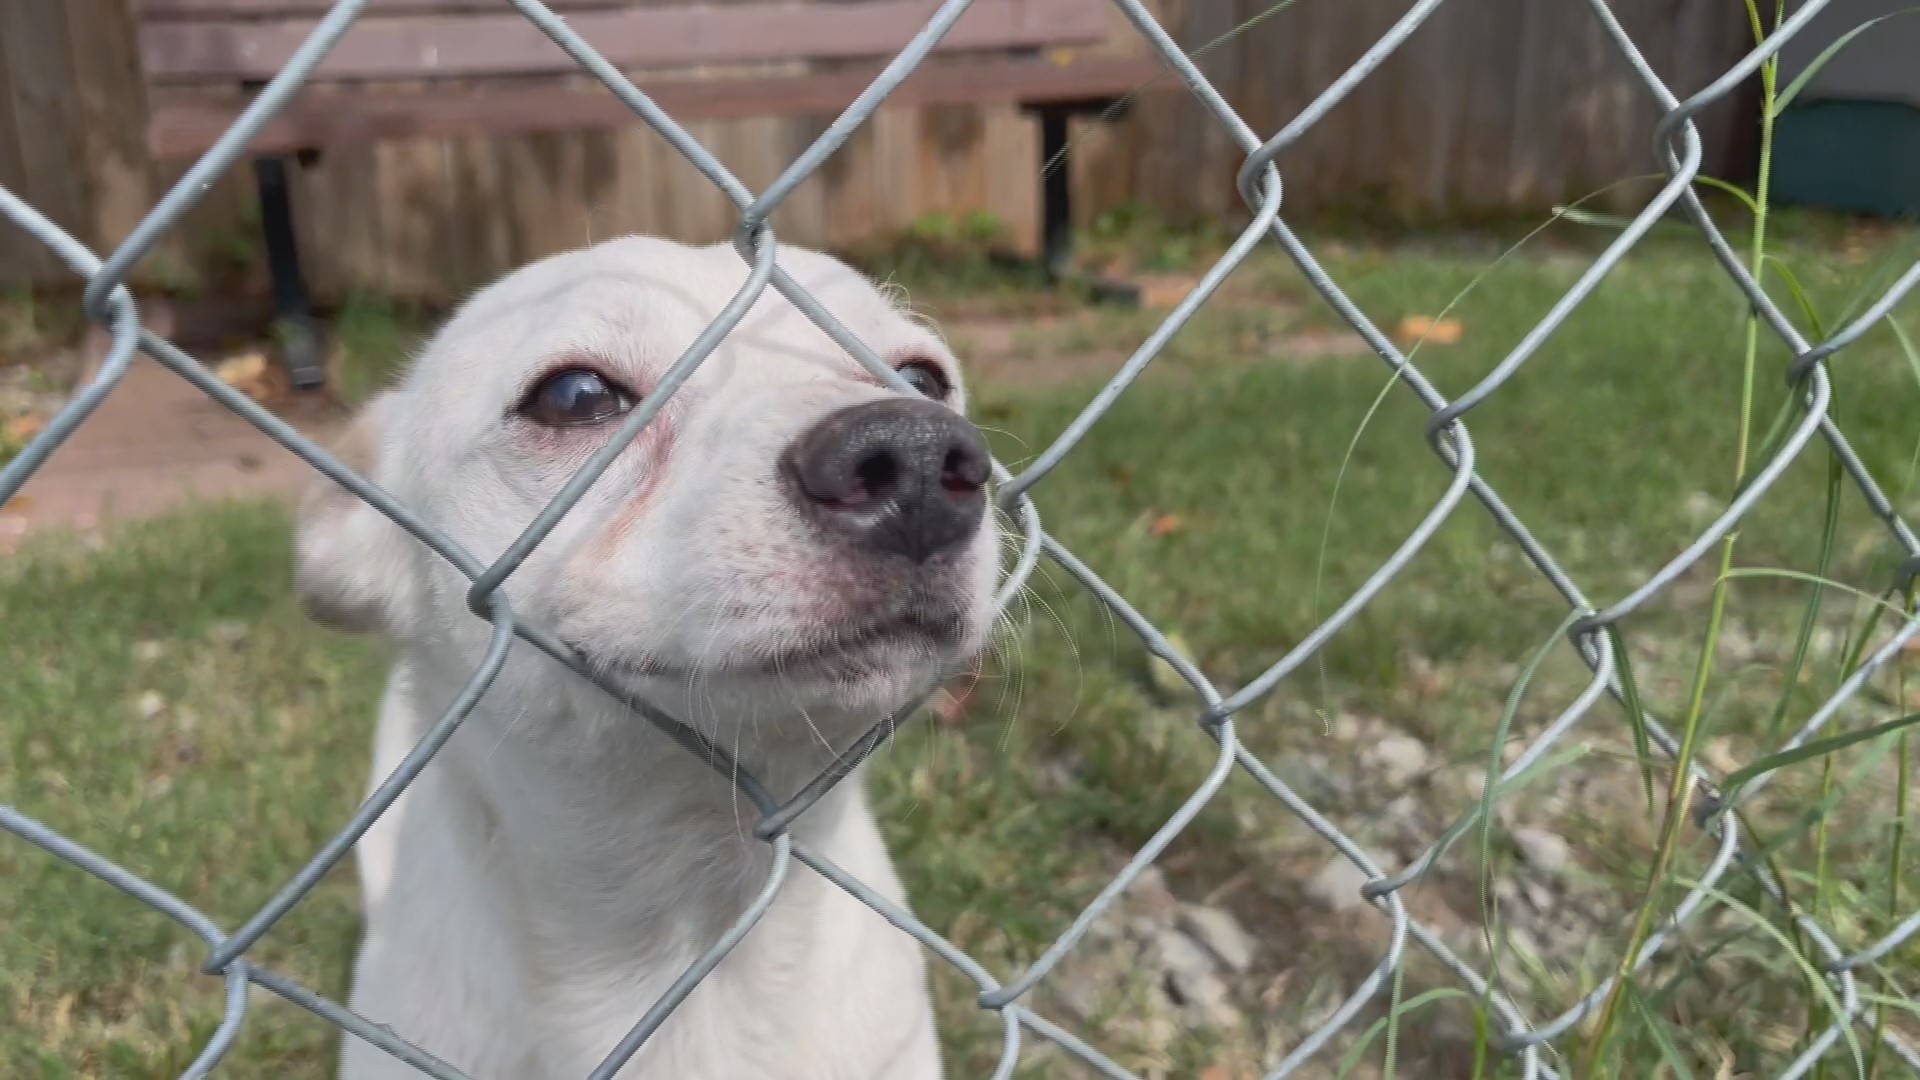 The animal shelter, which works to prevent euthanasia, is closing down after being notified that their rent will double in 2024. Now, they're planning to relocate.